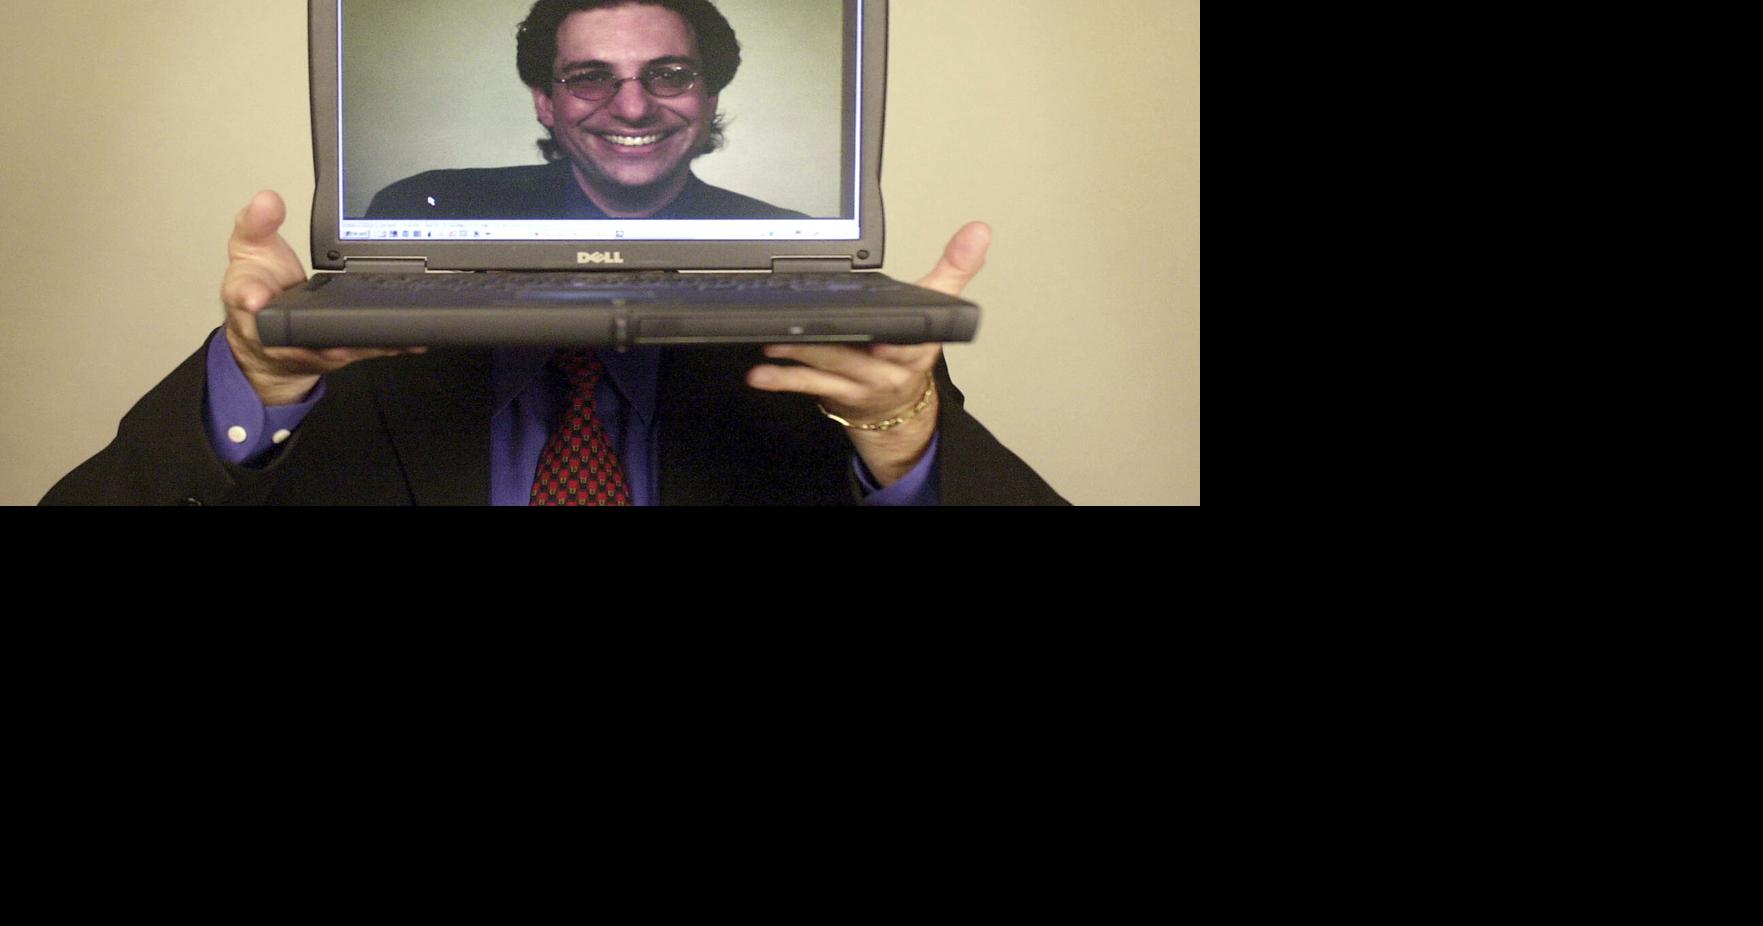 Kevin Mitnick phone phreaking hacker has passed away at the age of 59 | News